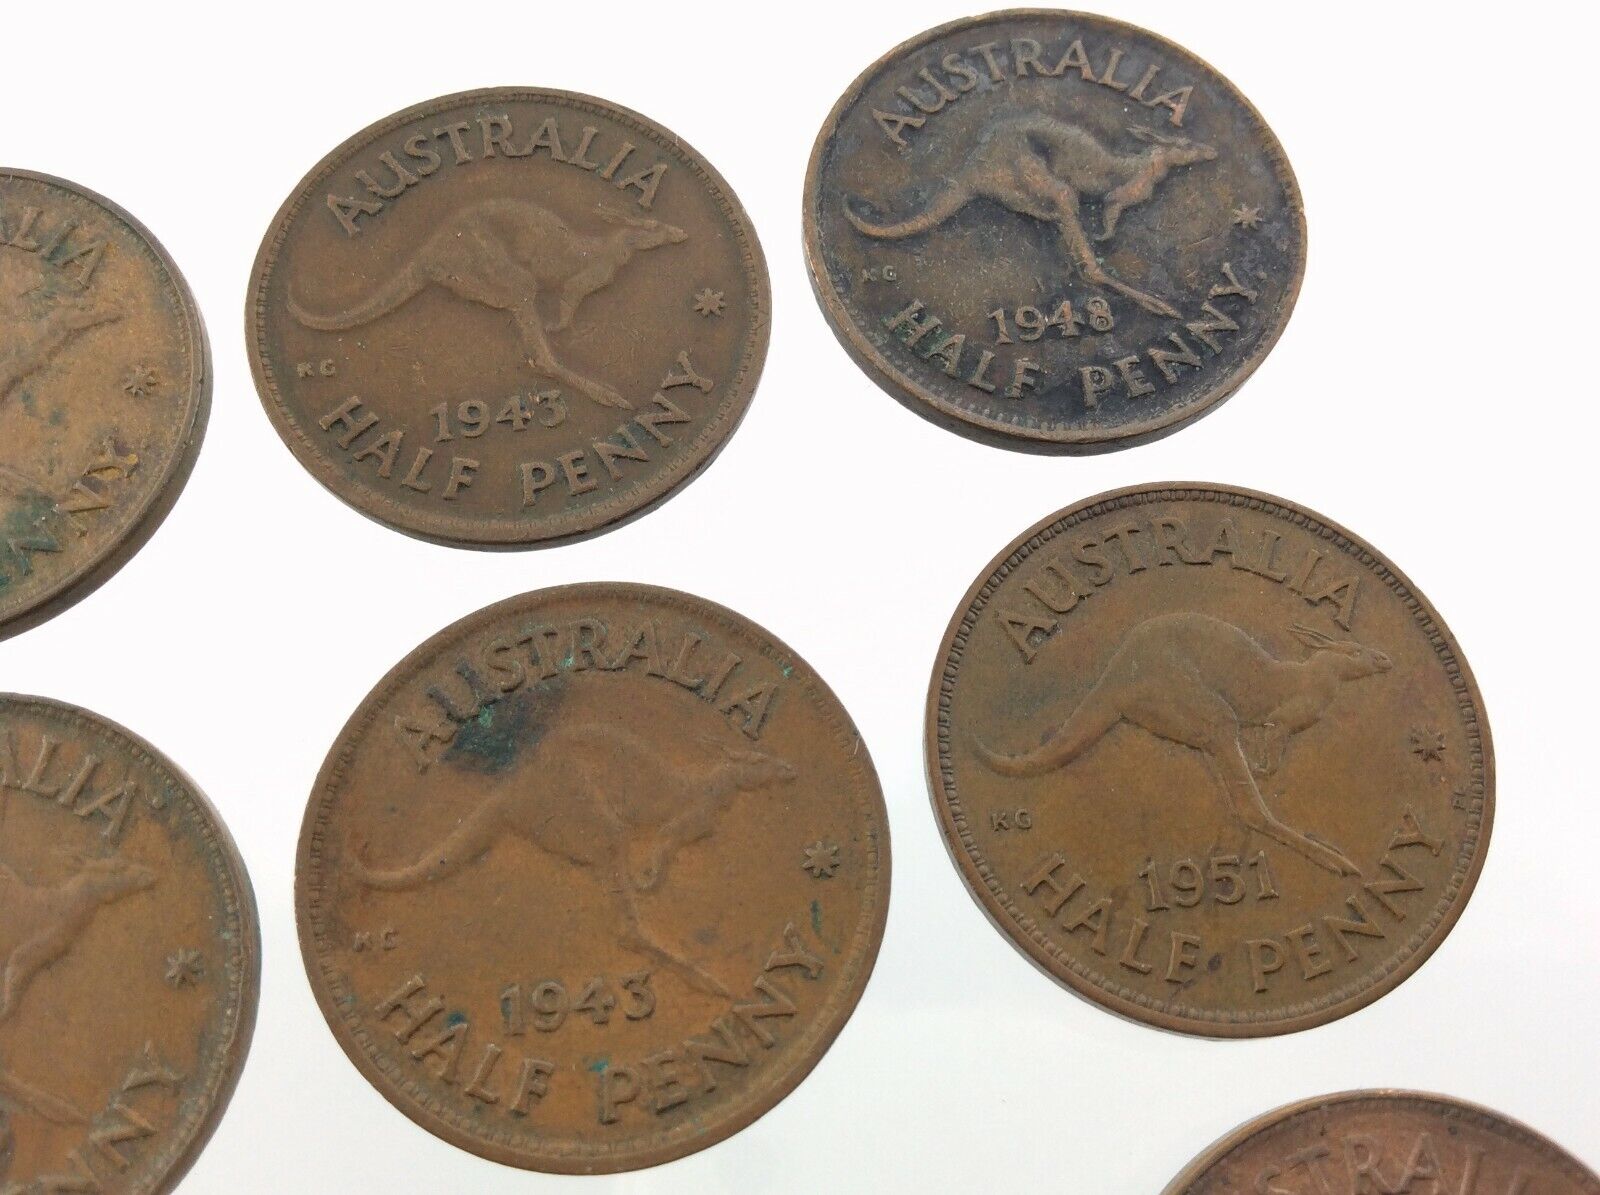 Lot of 16 Australia Half Penny KM# 41 Circulated Coin Bronze Various Dates W147